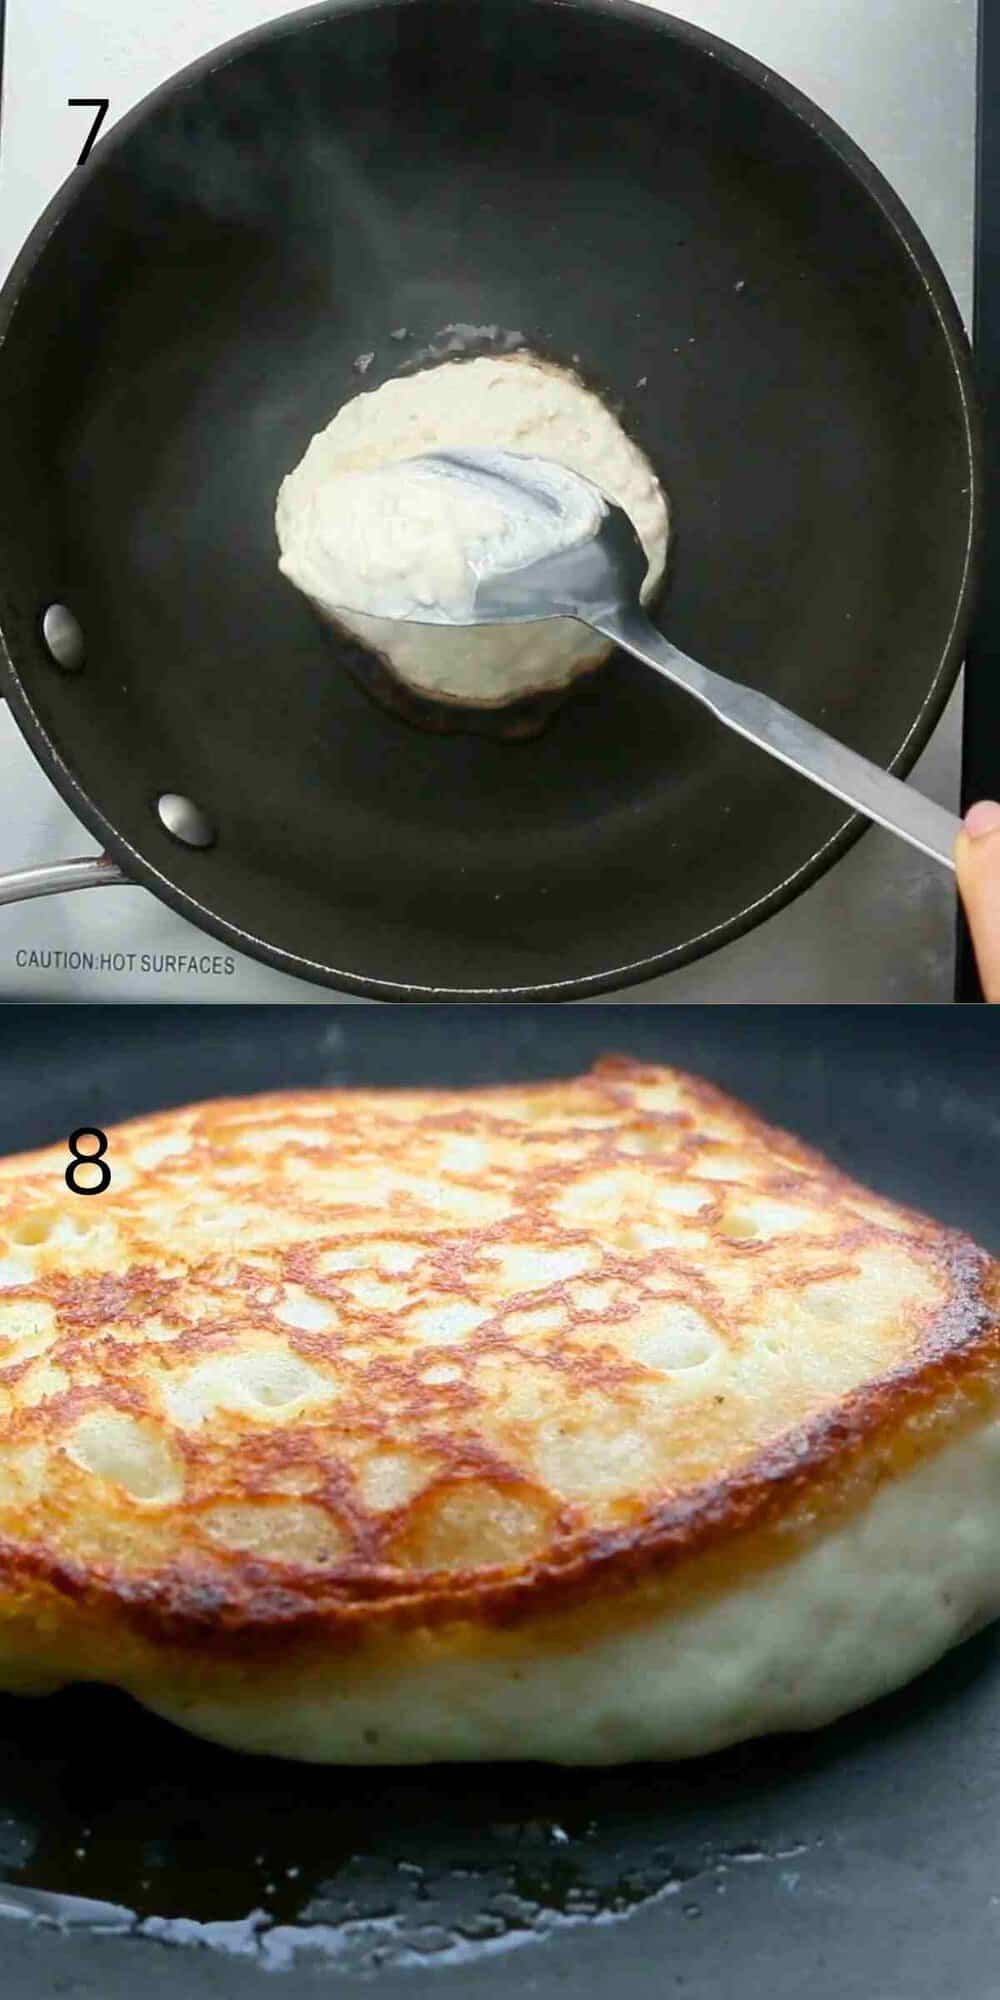 2 photo collage of pouring and cooking one pancake in a black skillet.